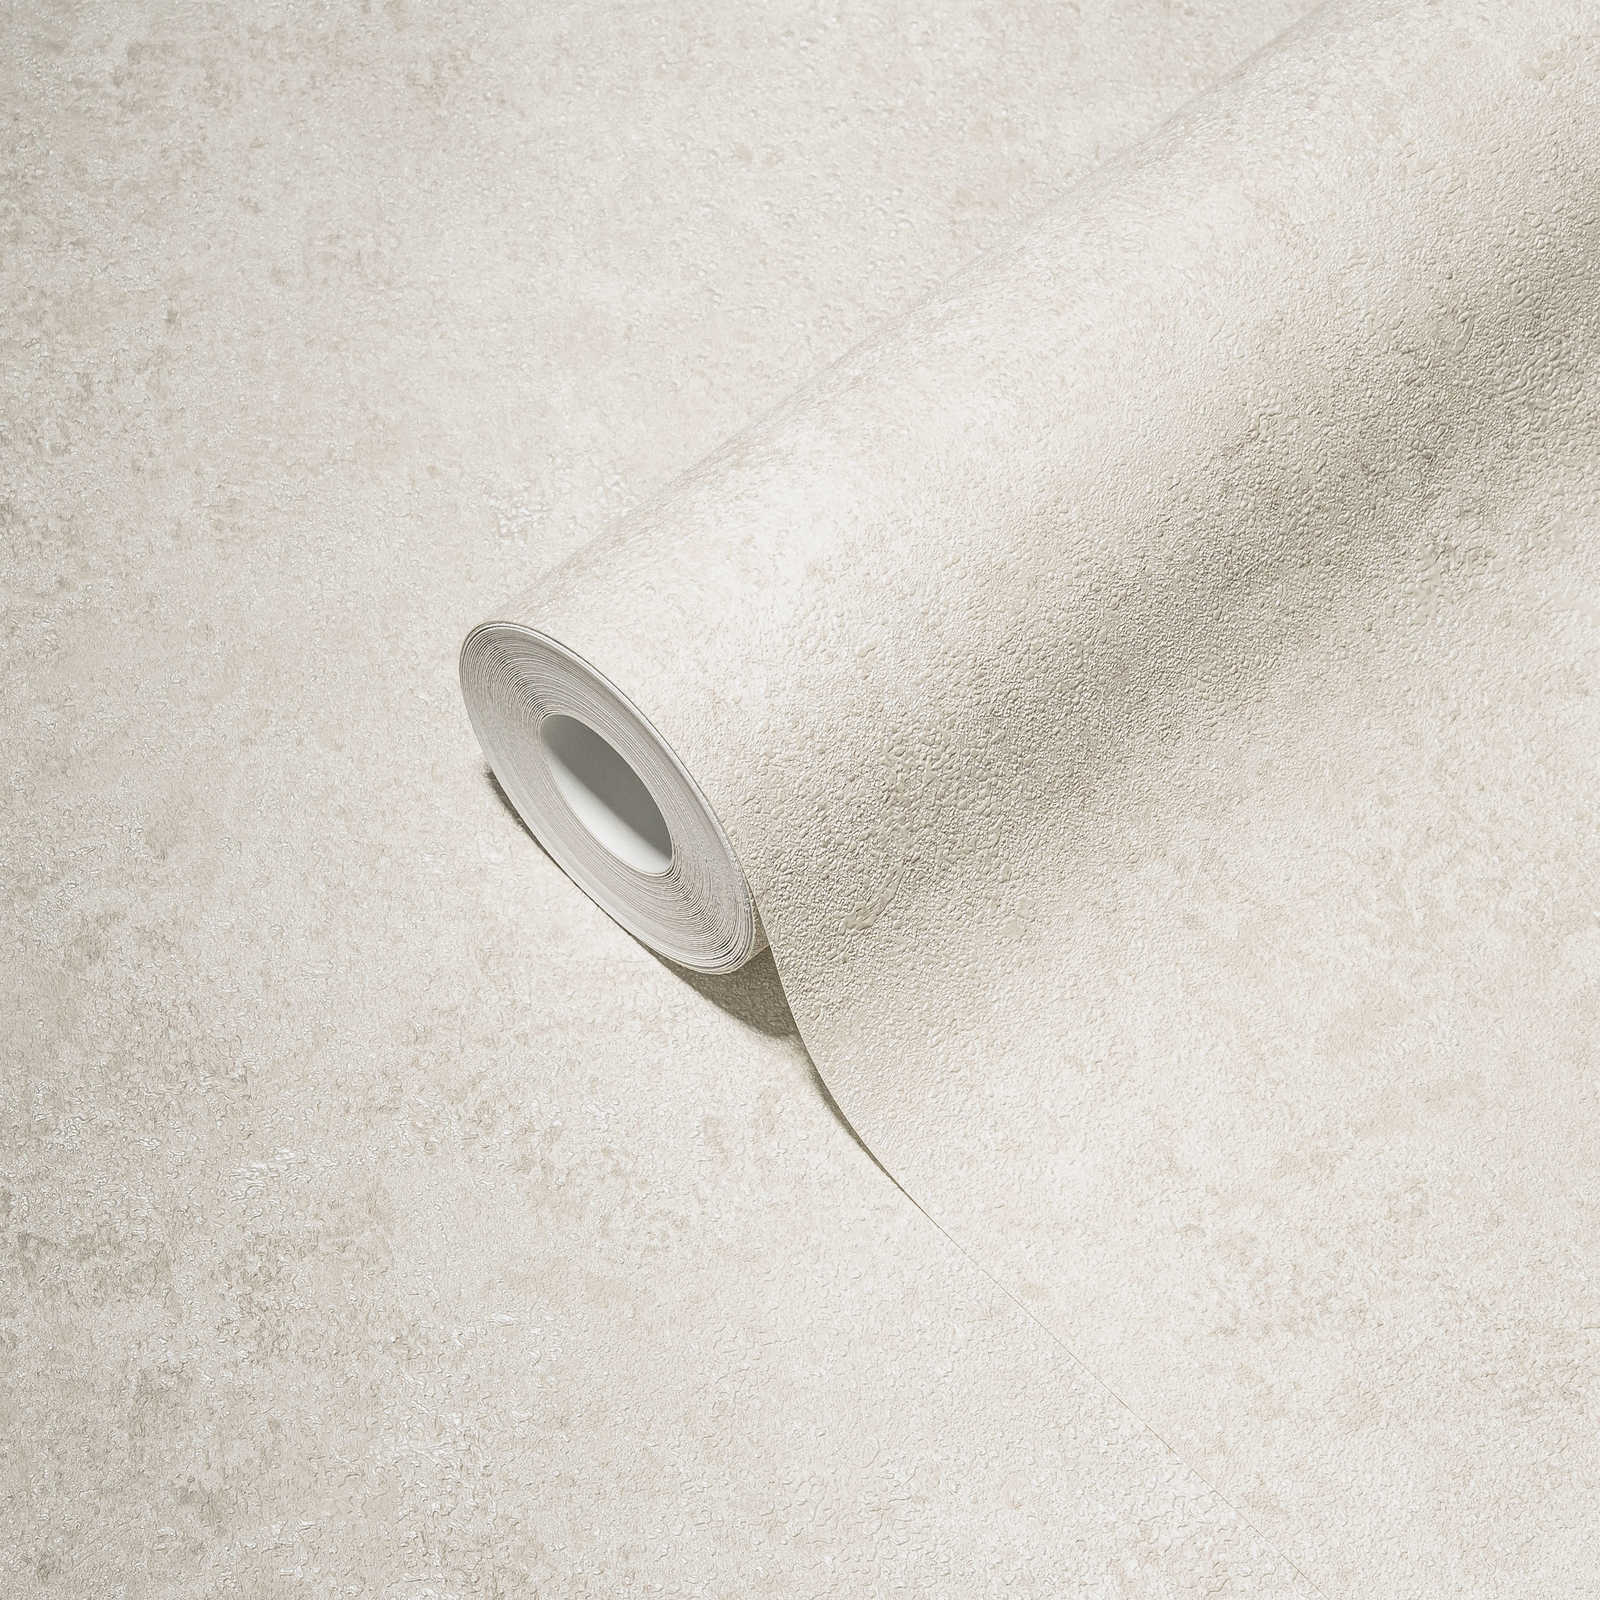             Non-woven wallpaper with metallic effect & used look - cream, grey
        